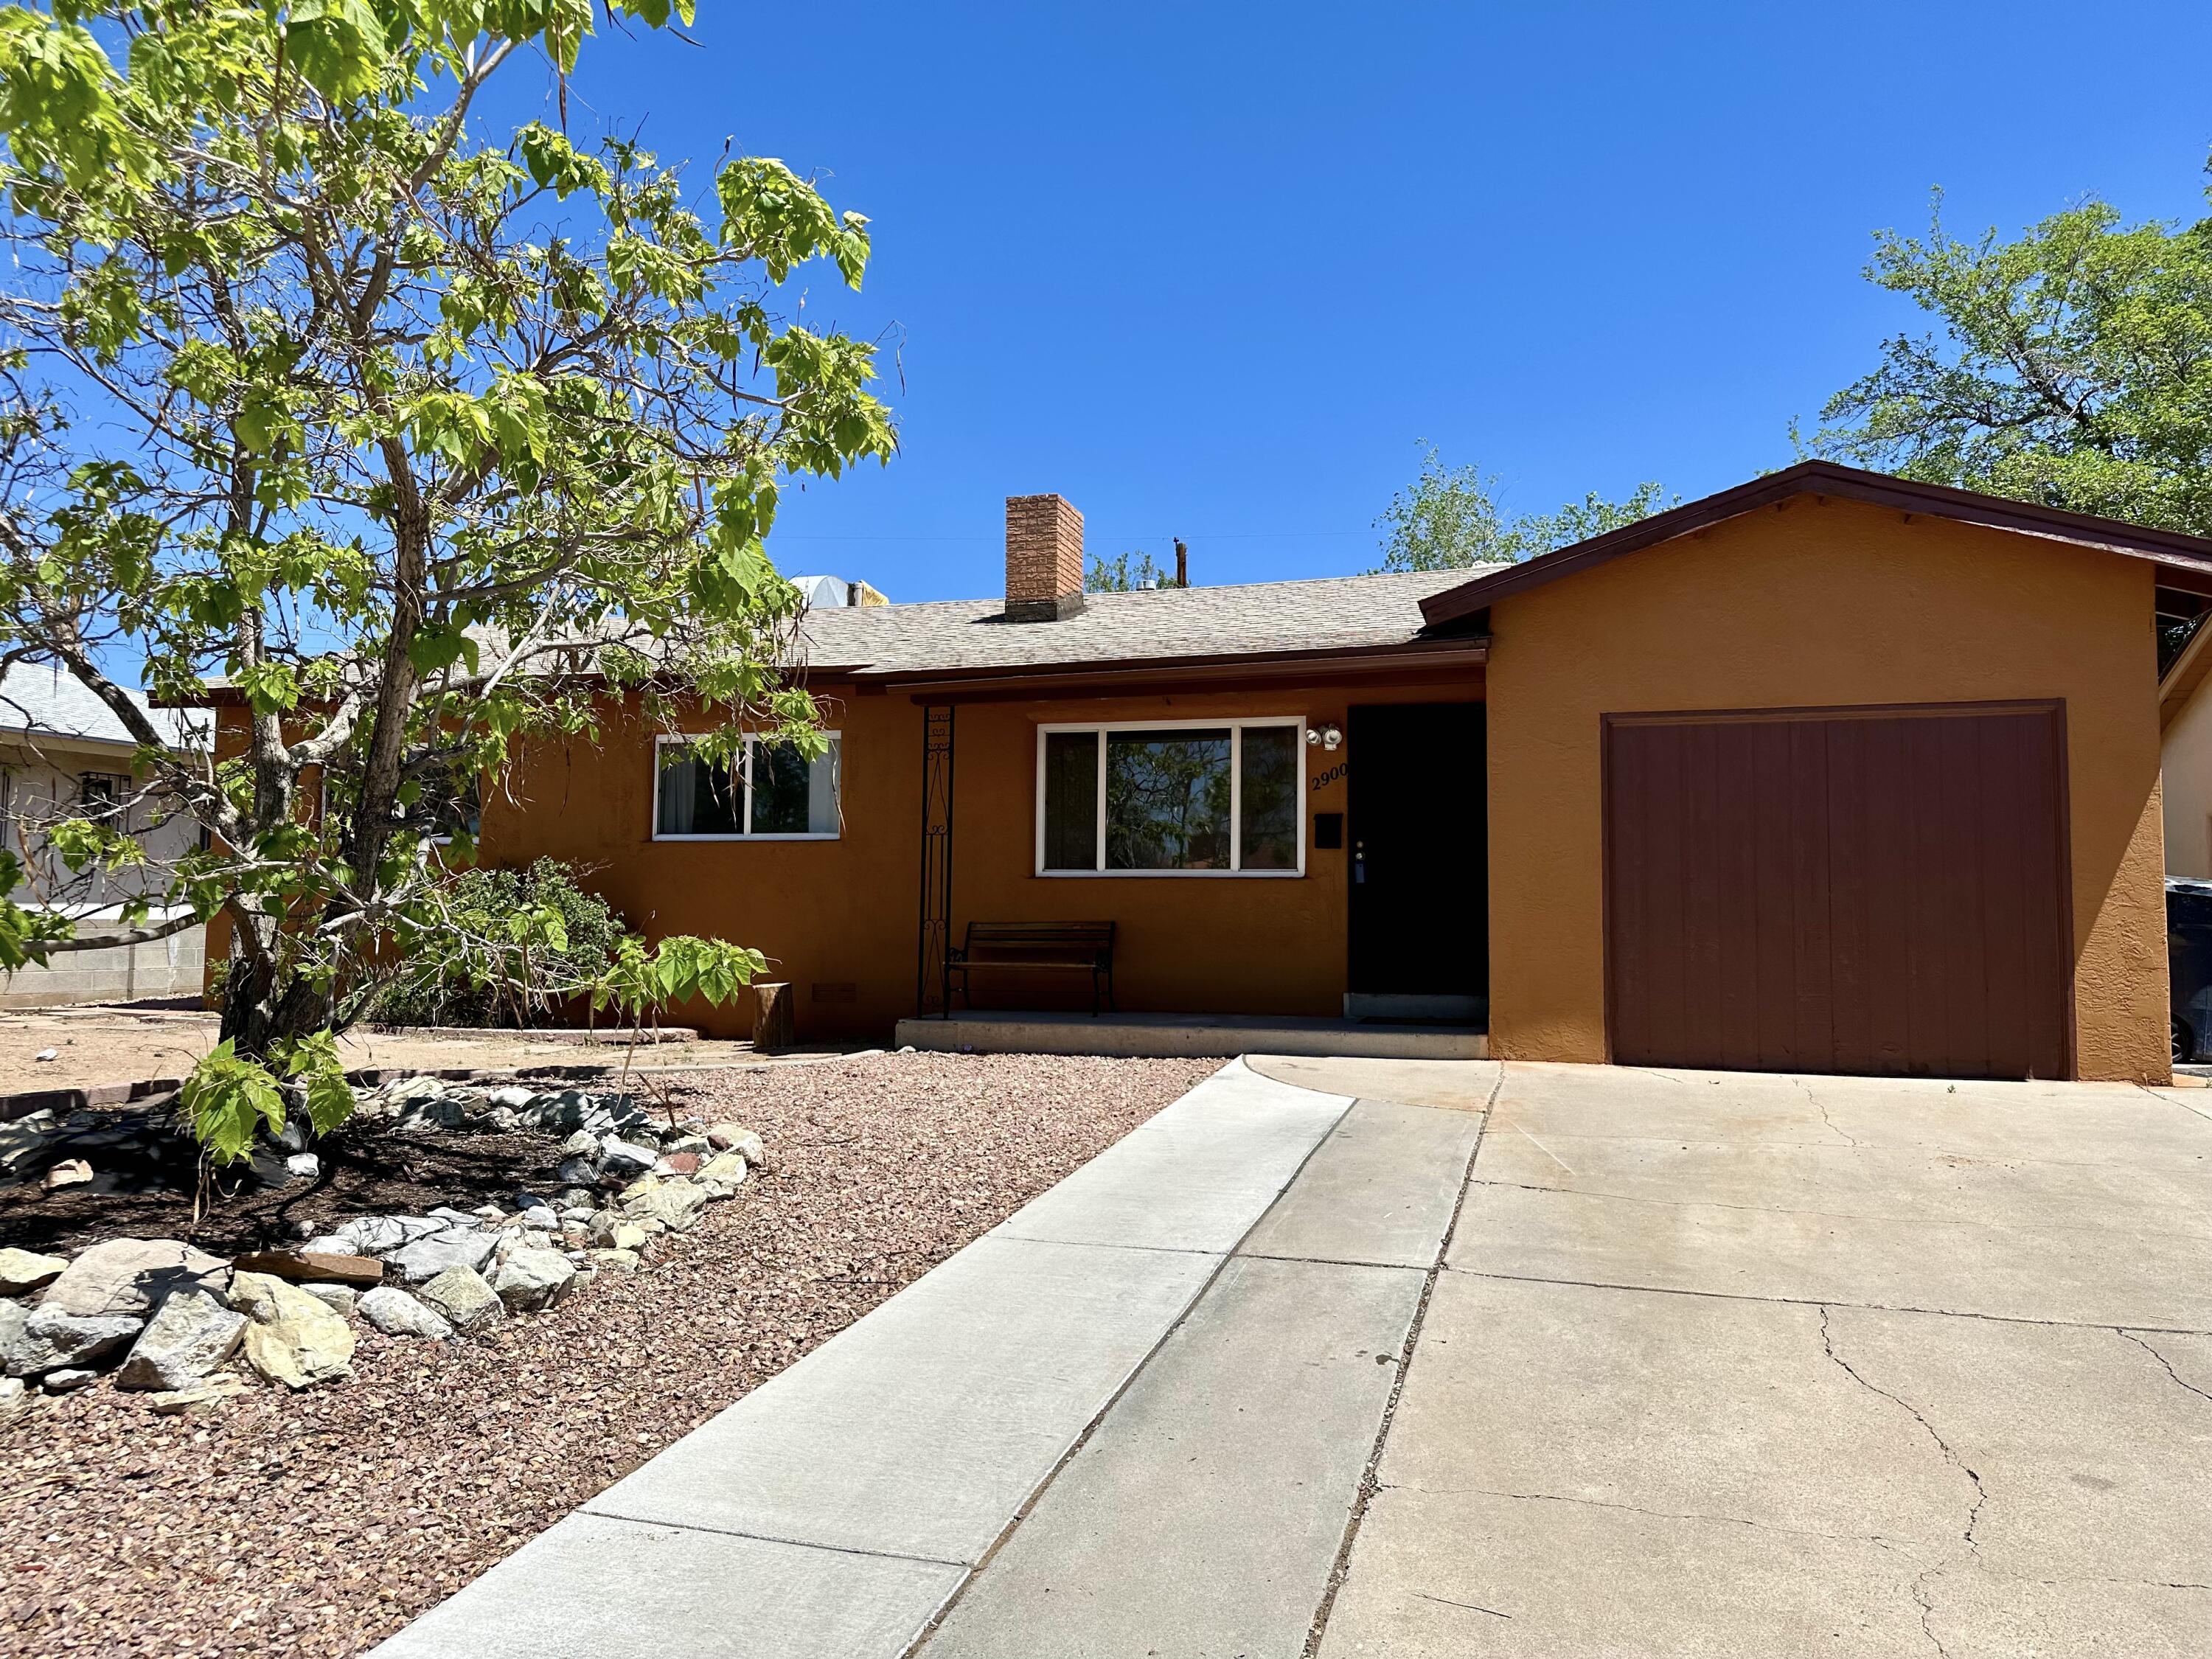 Charming 4 bed, 2 bath house in heart of Albuquerque. Real hardwood floors & fireplace add cozy touch. Great backyard for entertaining, with large storage shed. Near shopping, dining & freeway access. Ideal for those who need a little space.